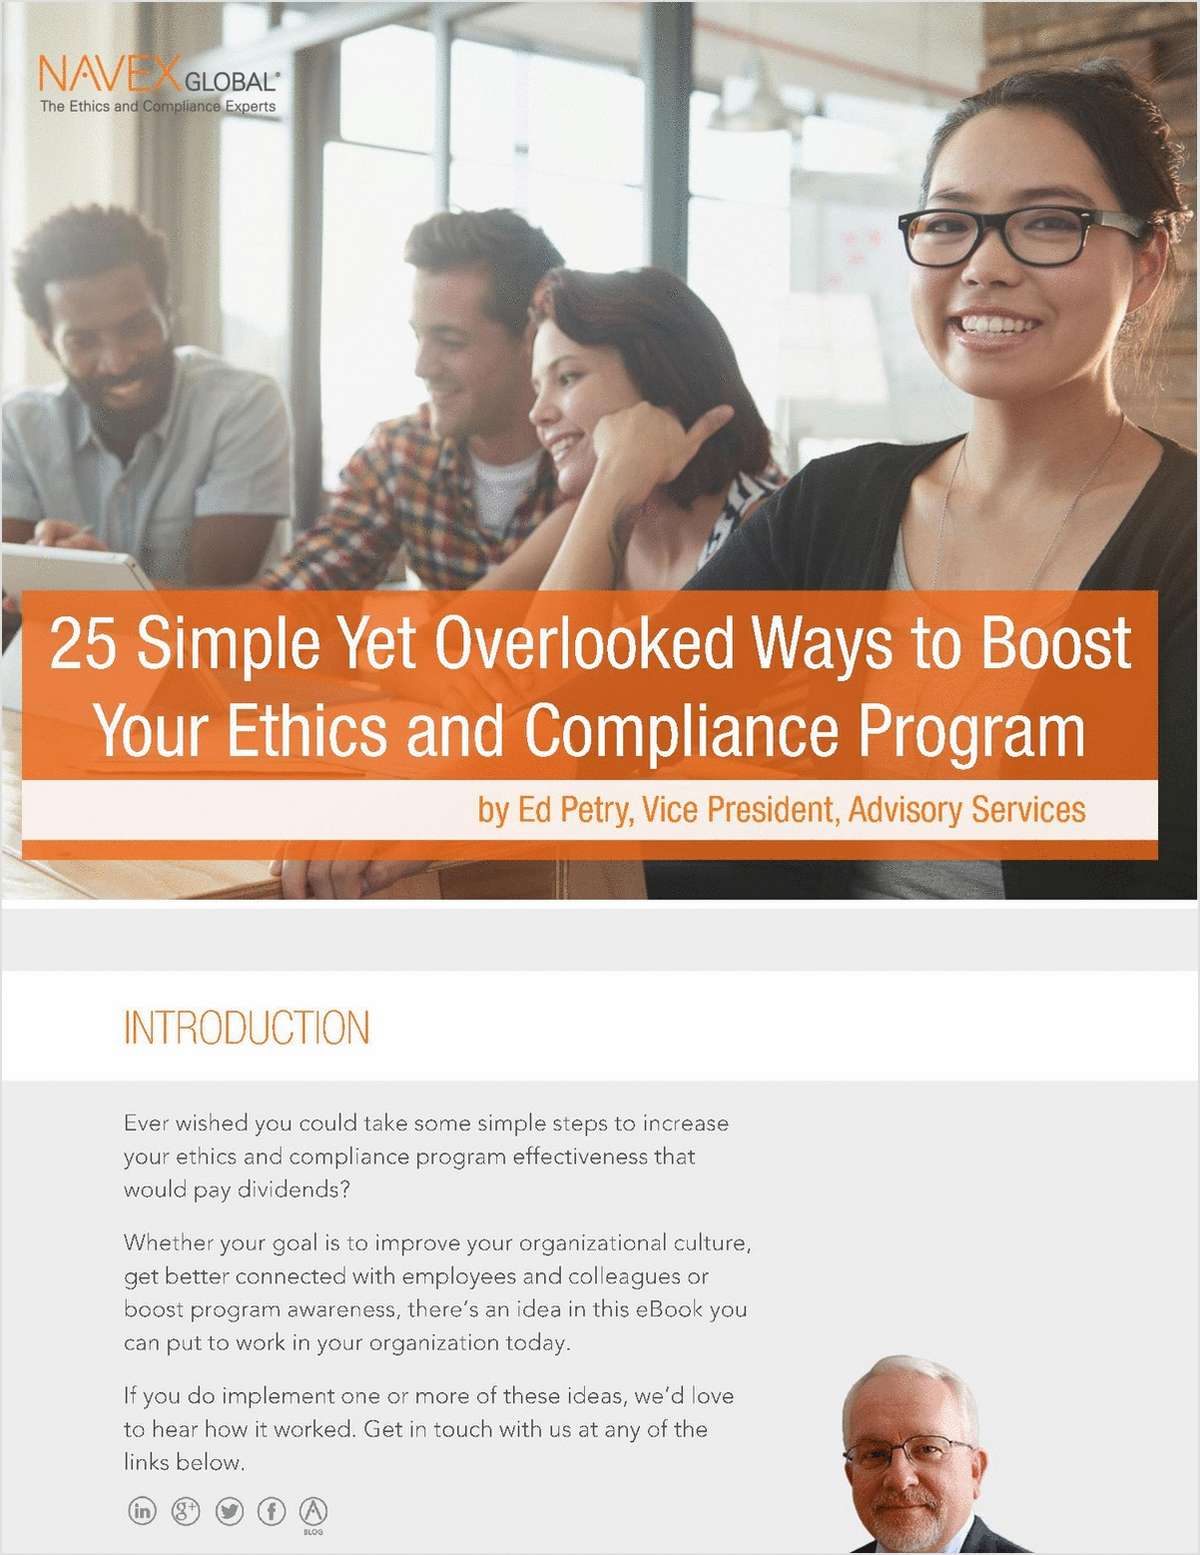 25 Simple Yet Overlooked Ways to Boost Your Ethics and Compliance Program